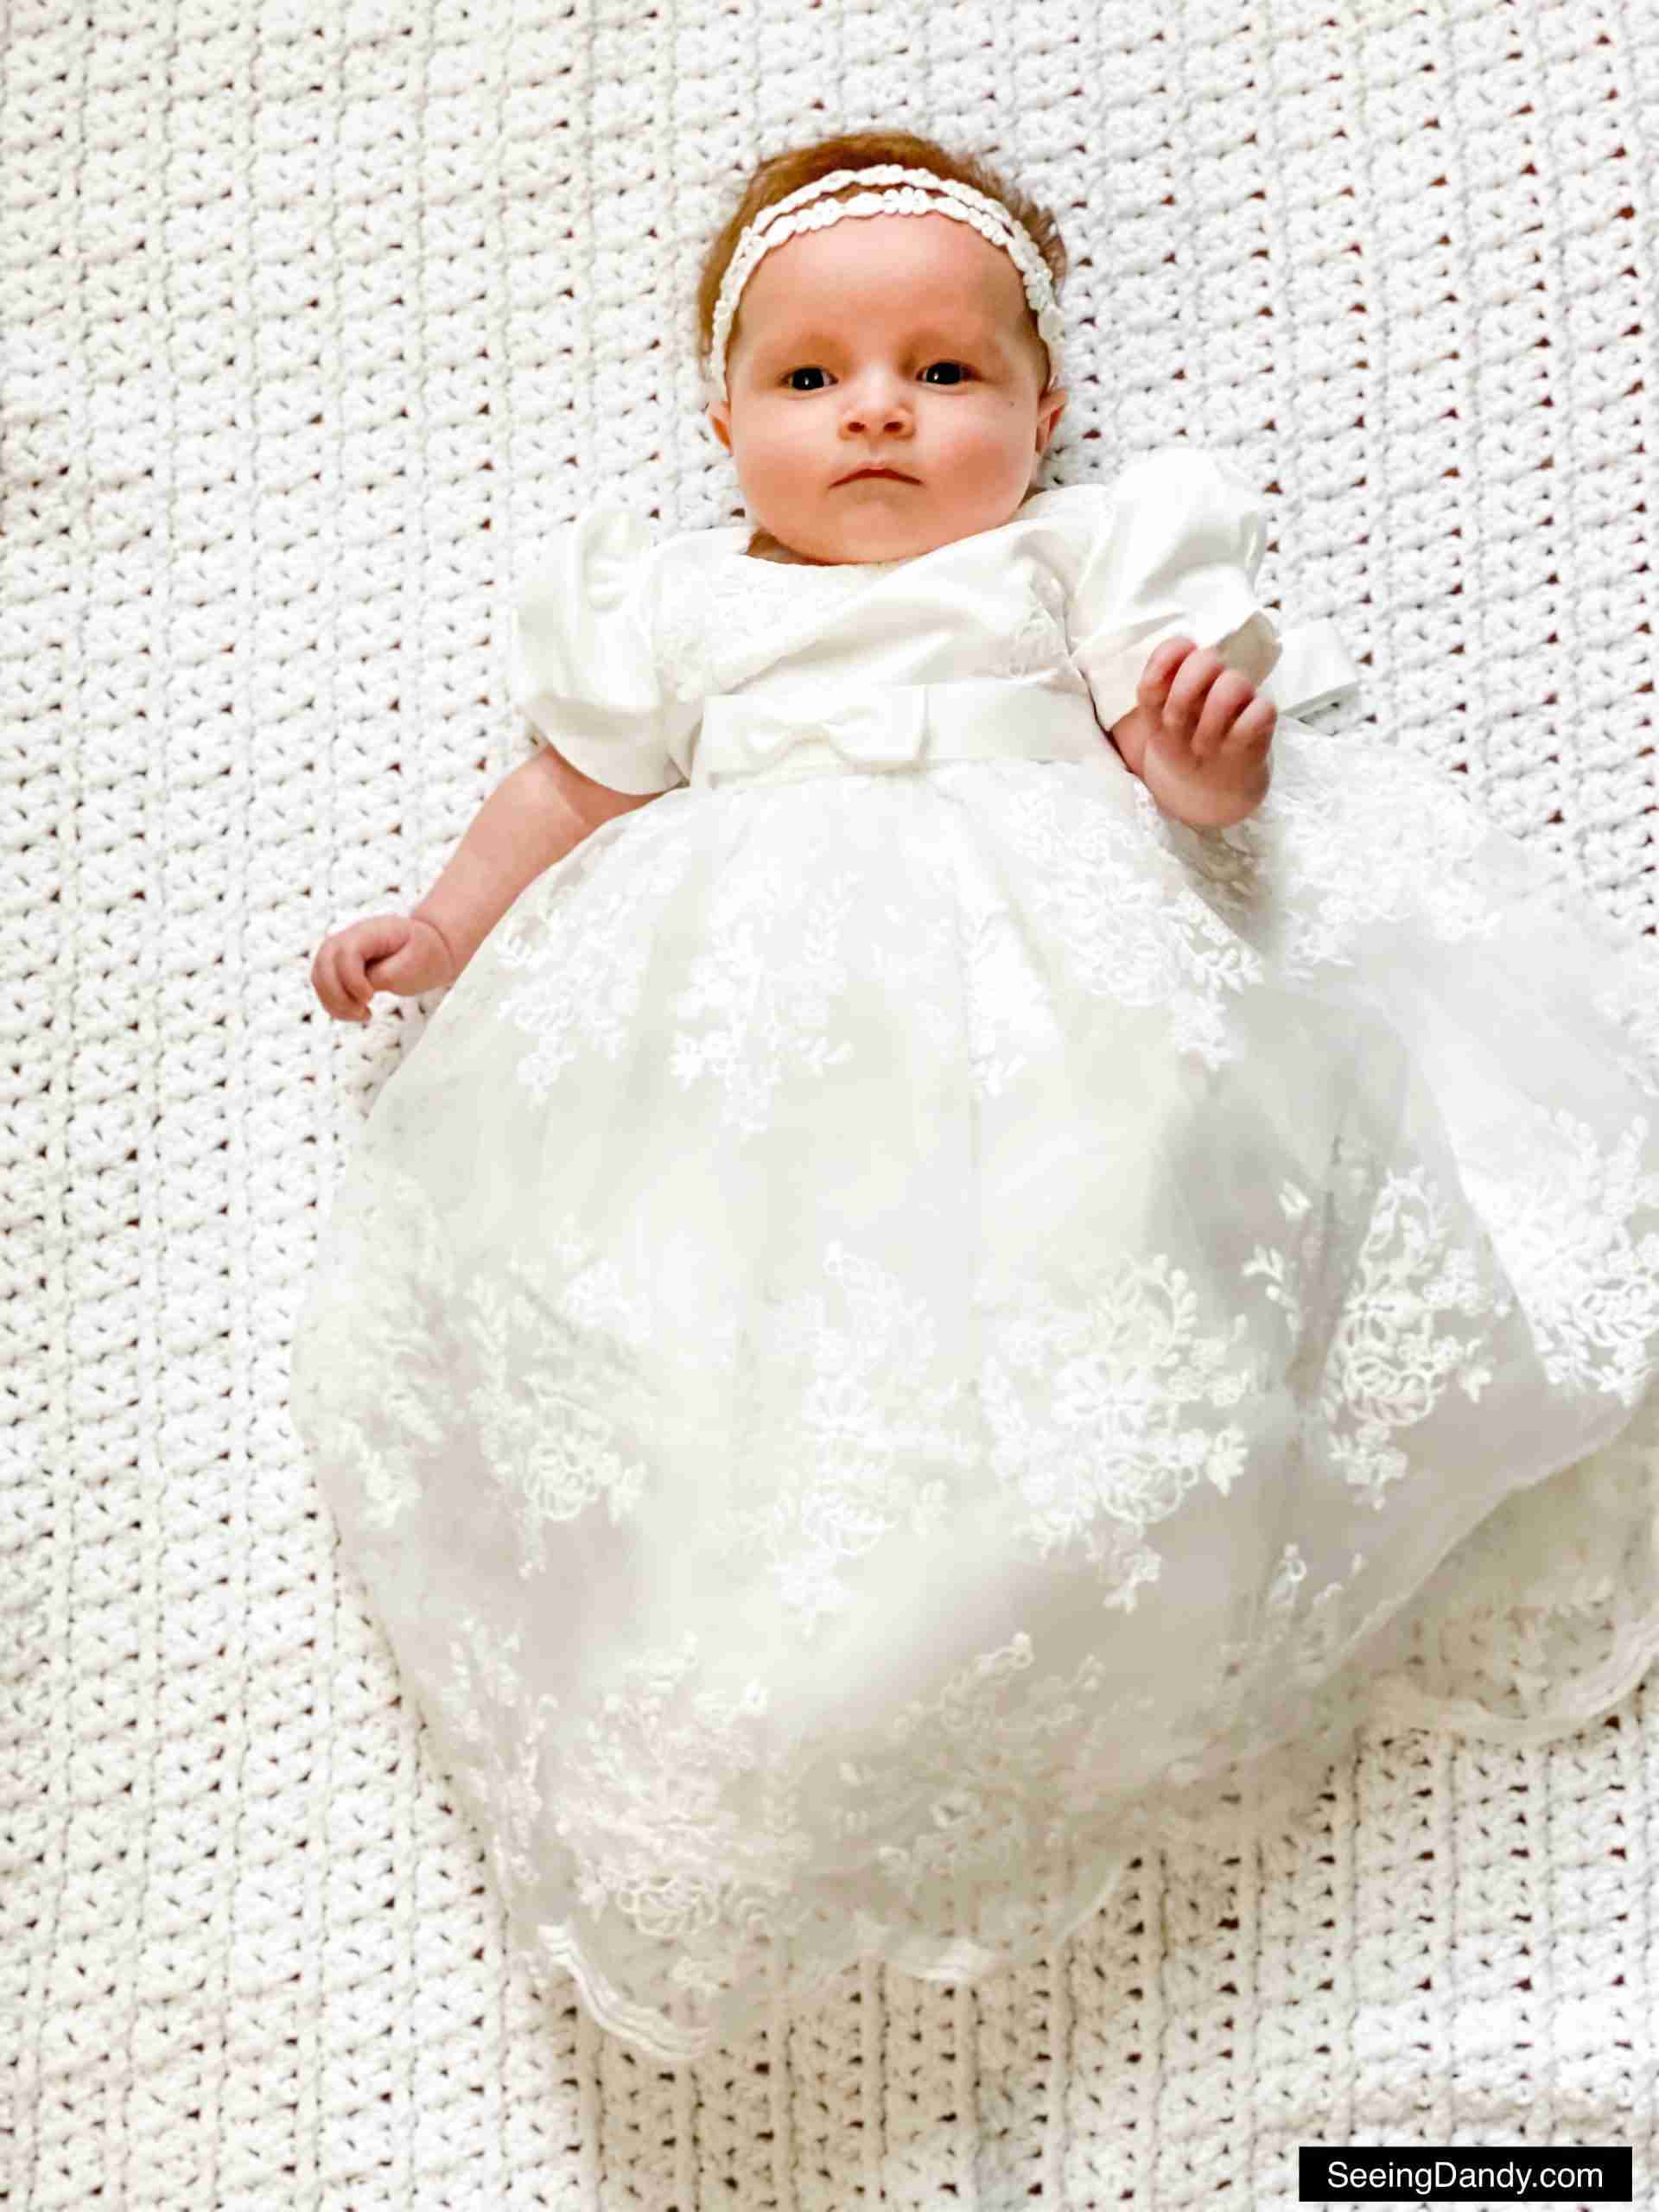 glamulice white lace baby dress, christening dresses, embroidery white baby dress, lds blessing dress, lds blessing gown, white crochet baby blanket, darcy baby girl name